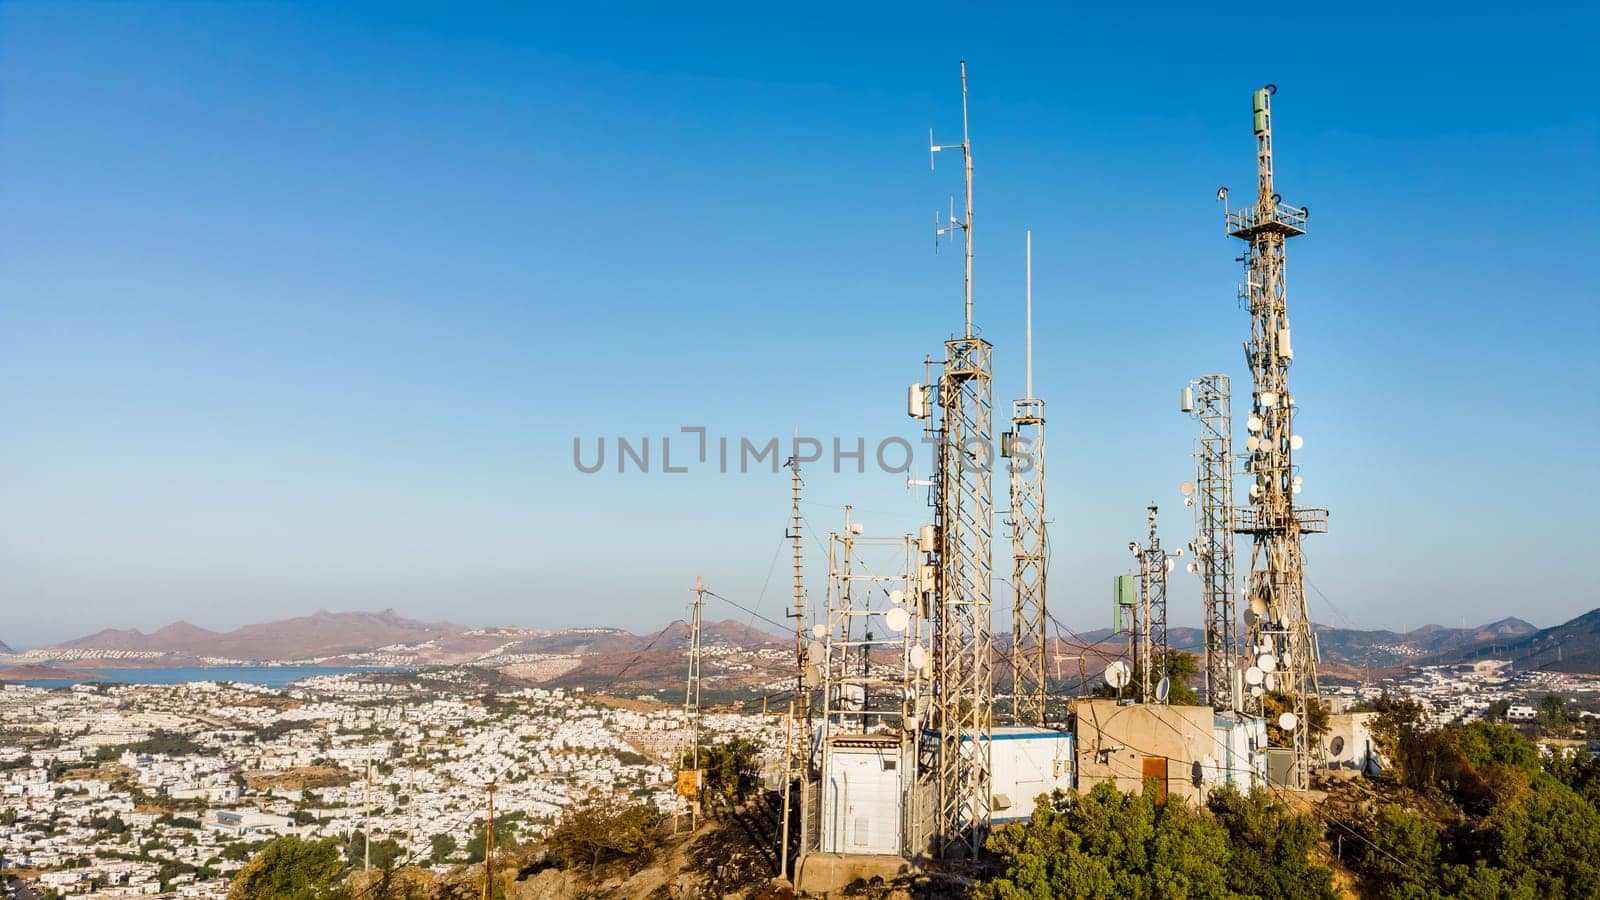 View of Telecommunication mast TV antennas at sunrise on mountain with city on background. Antenna Telephone Network Communication download photo